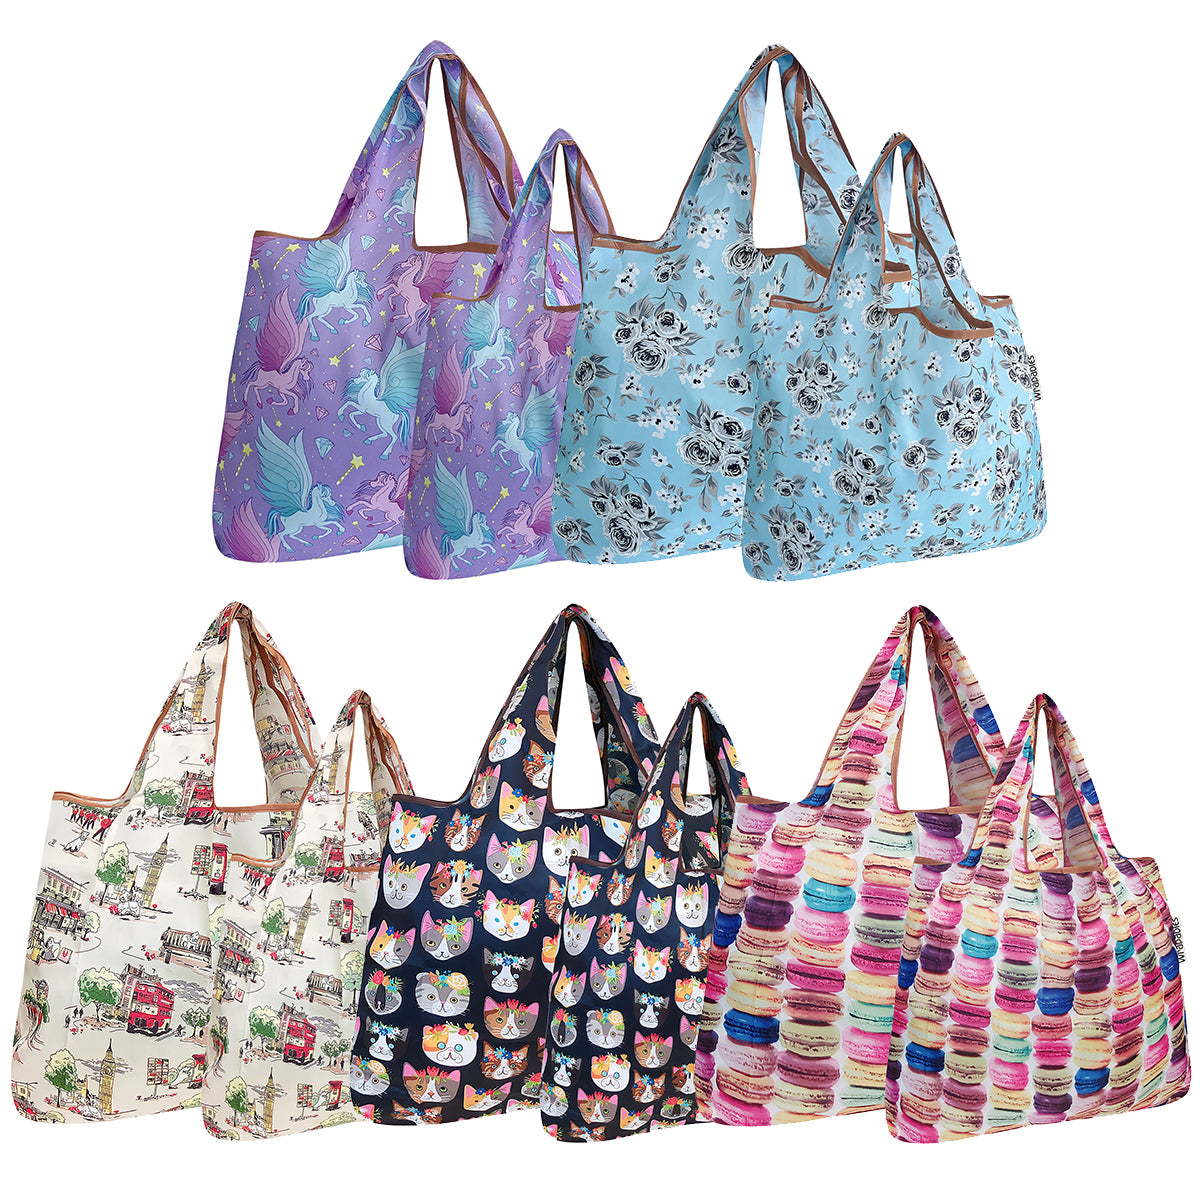 Wrapables Large & Small Foldable Tote Nylon Reusable Grocery Bags, Set of 10